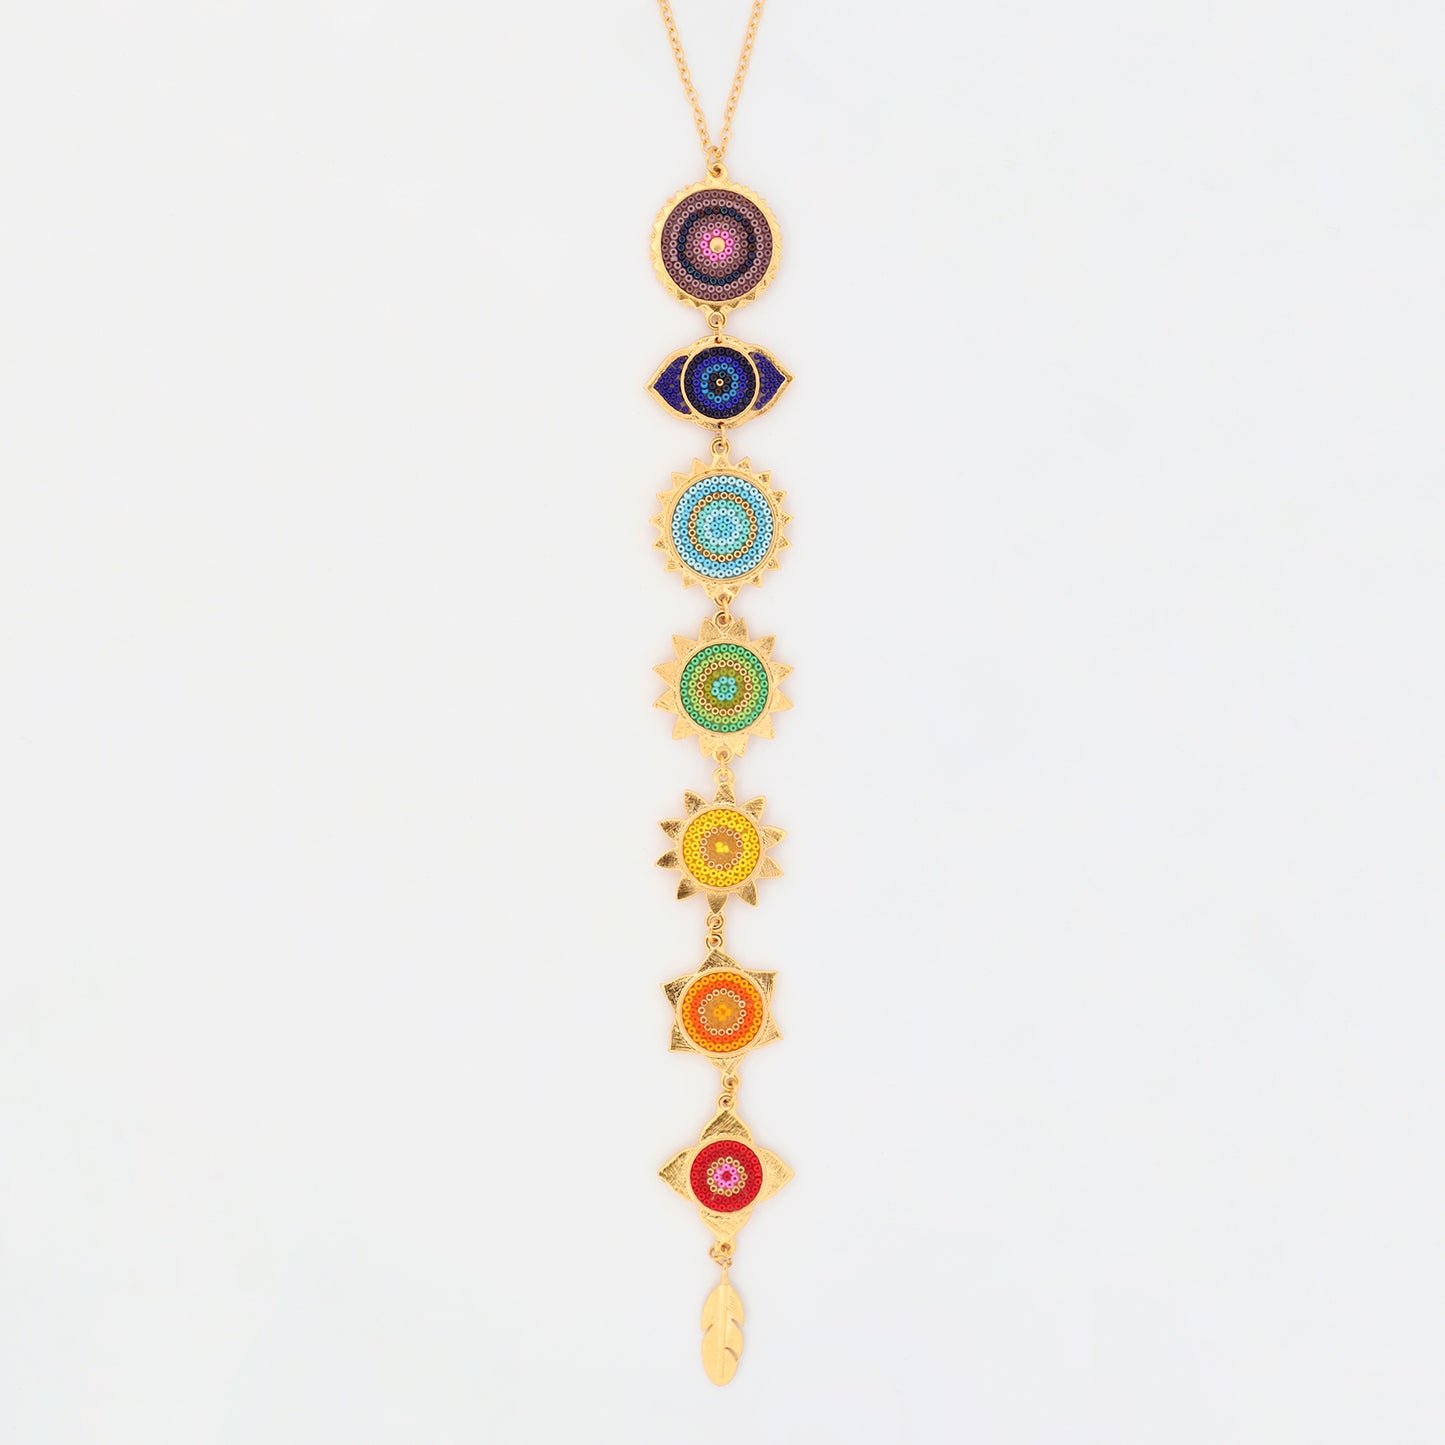 Energy and balance Necklace